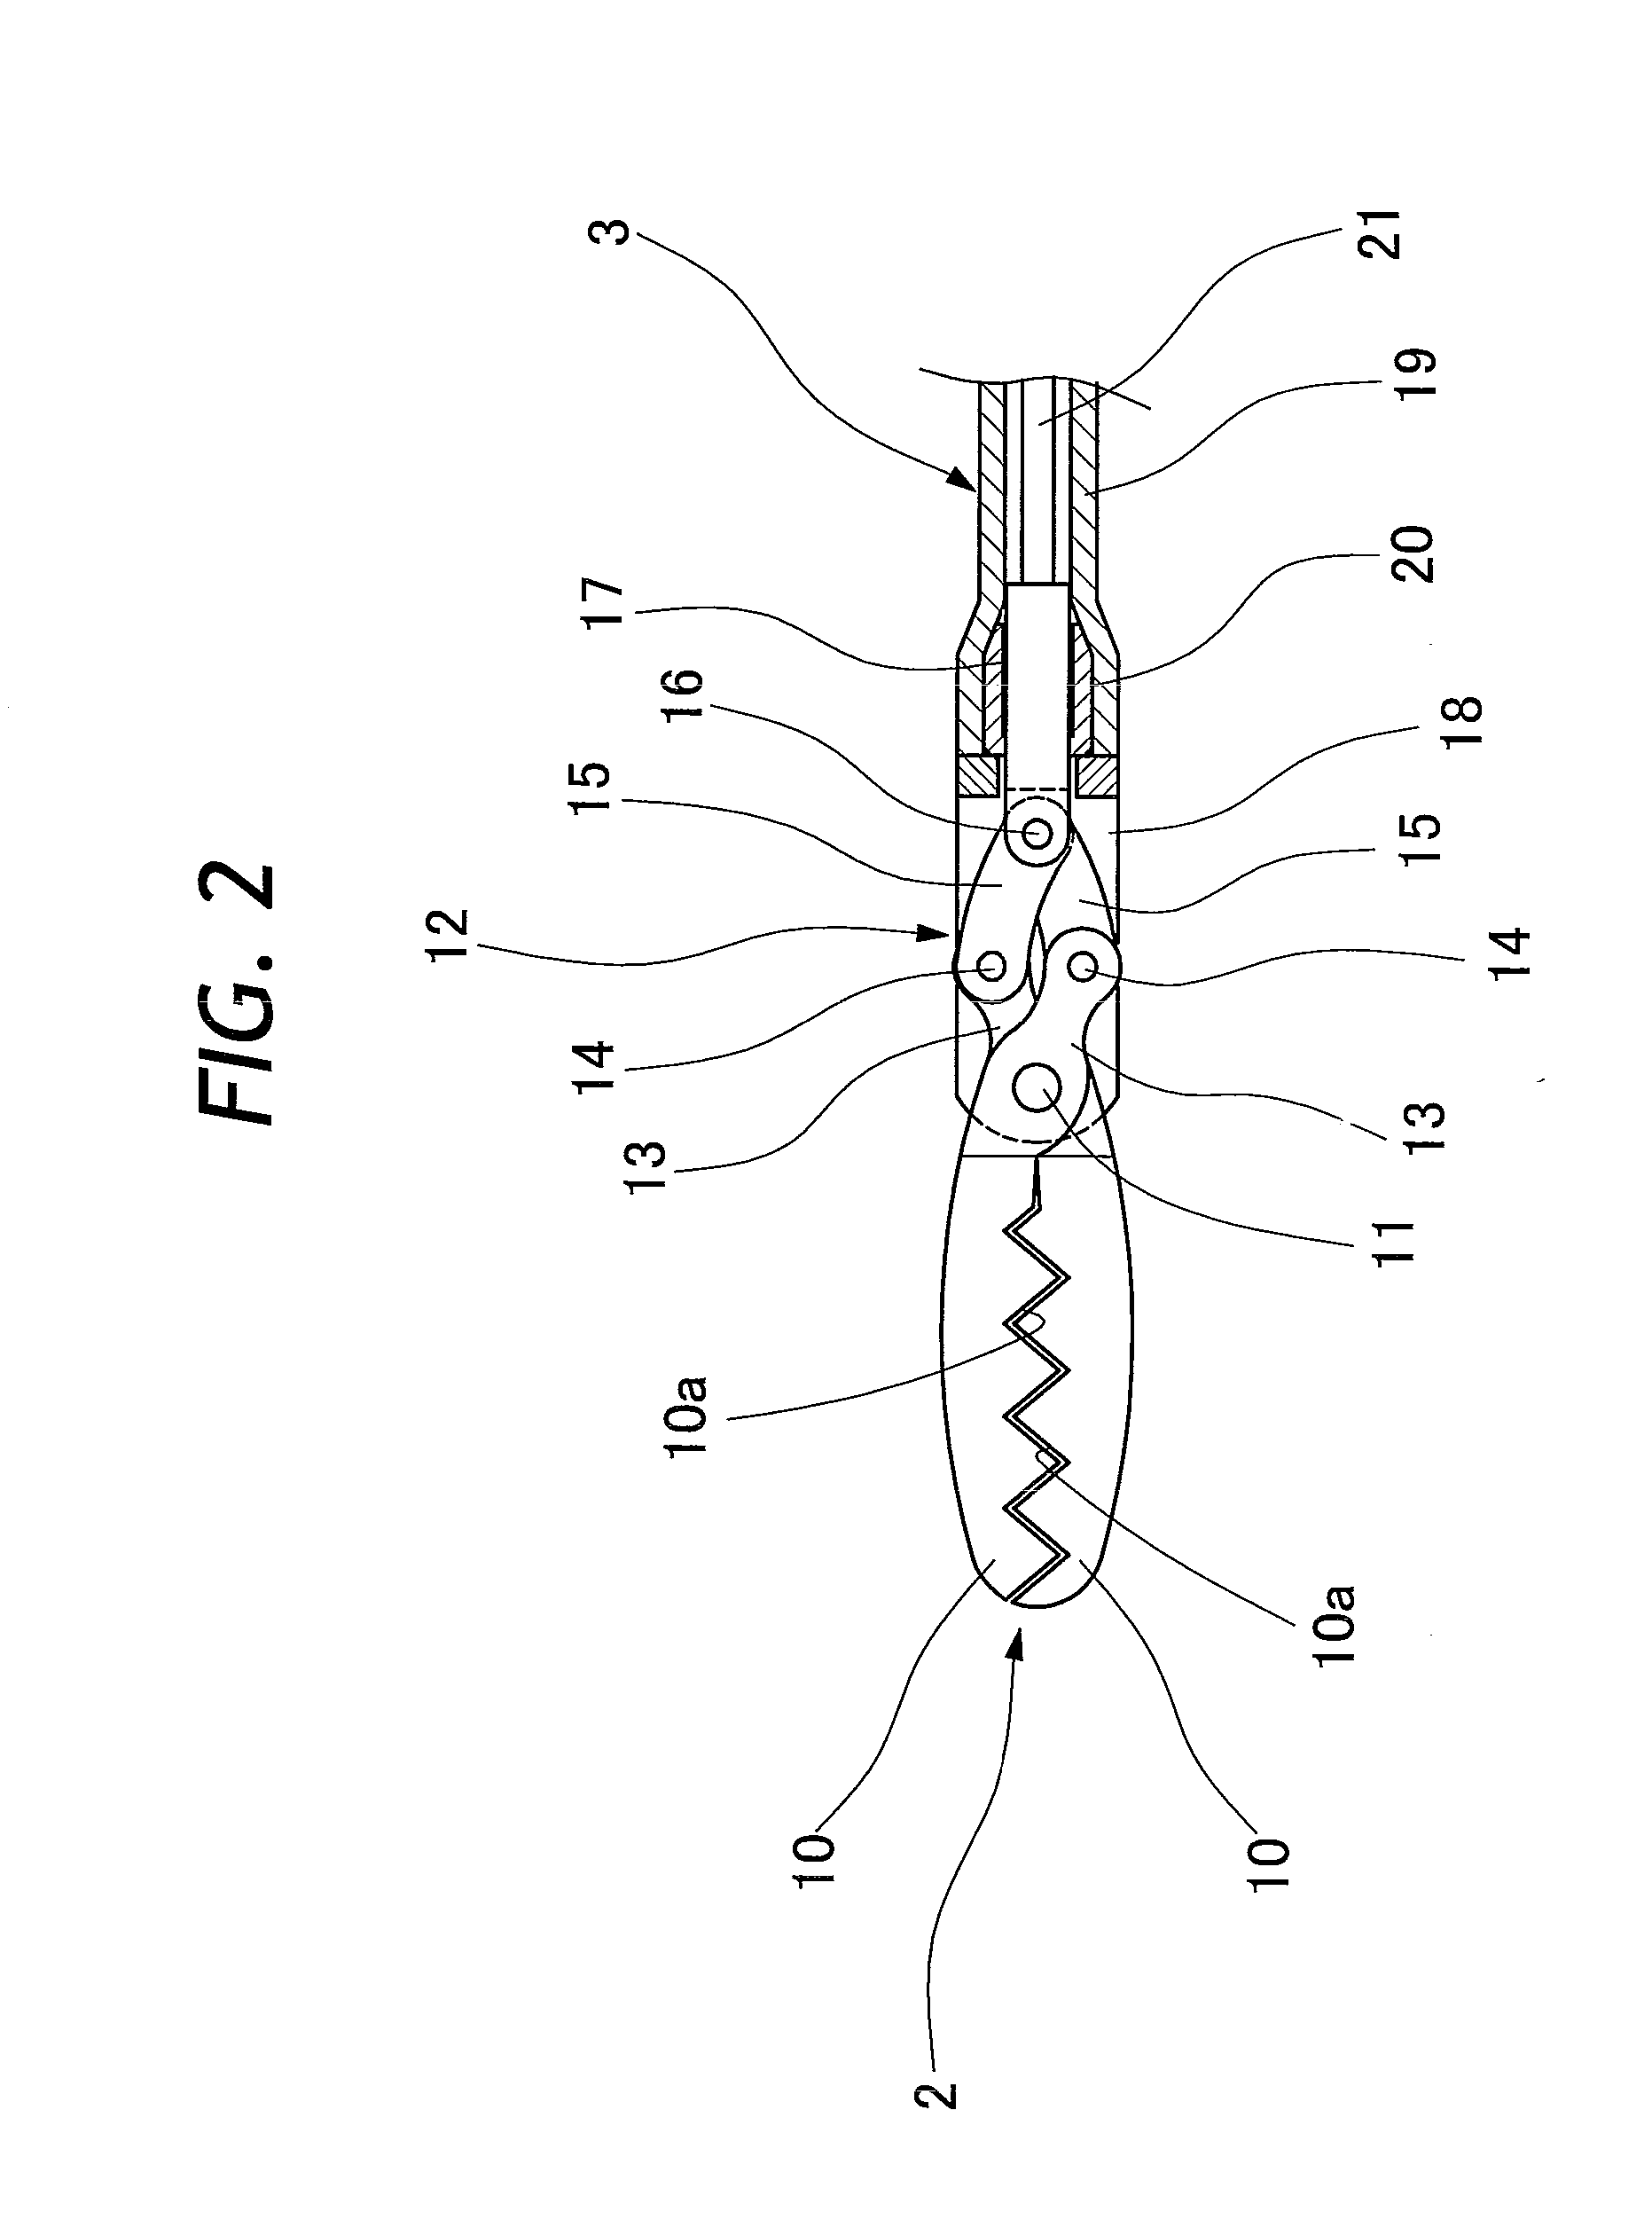 Endoscopically inserting surgical tool